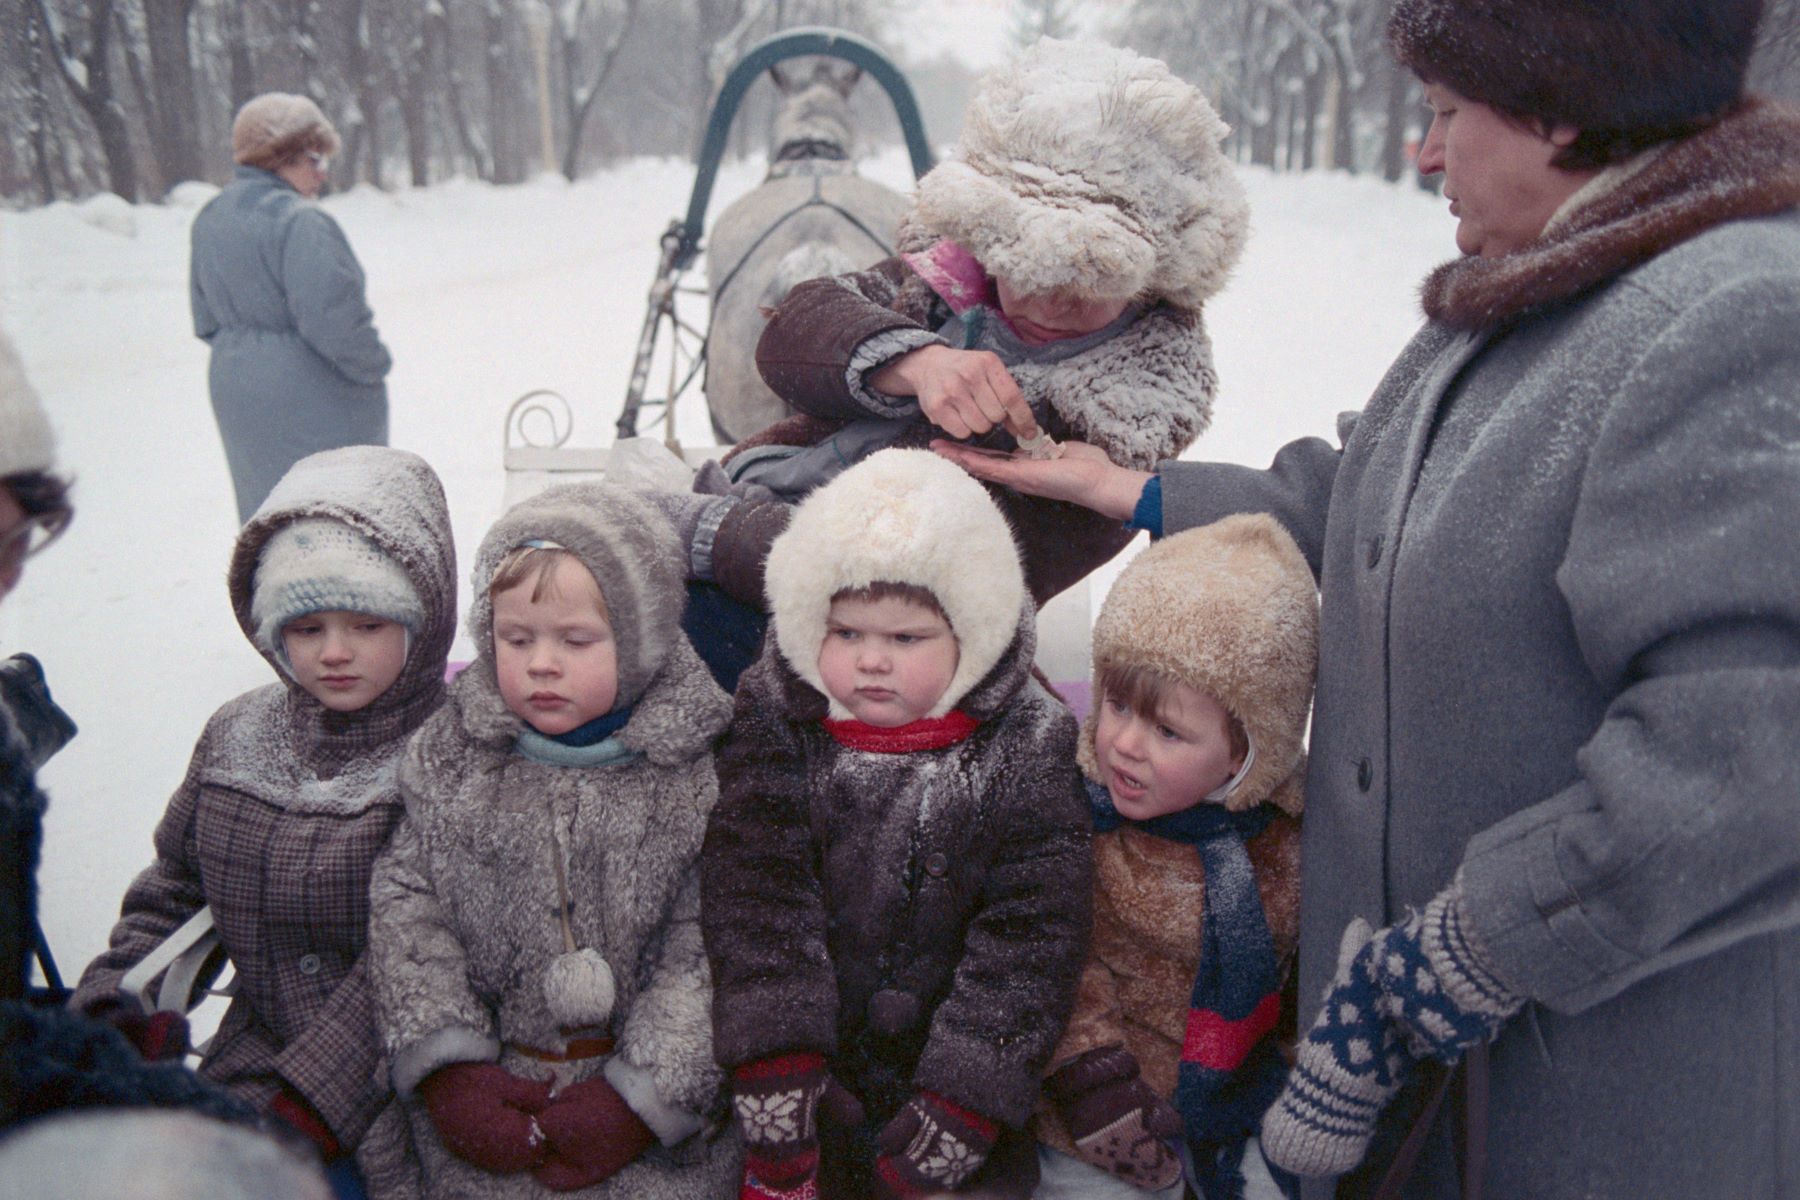 Children bundled up in winter coats in Moscow, Russia